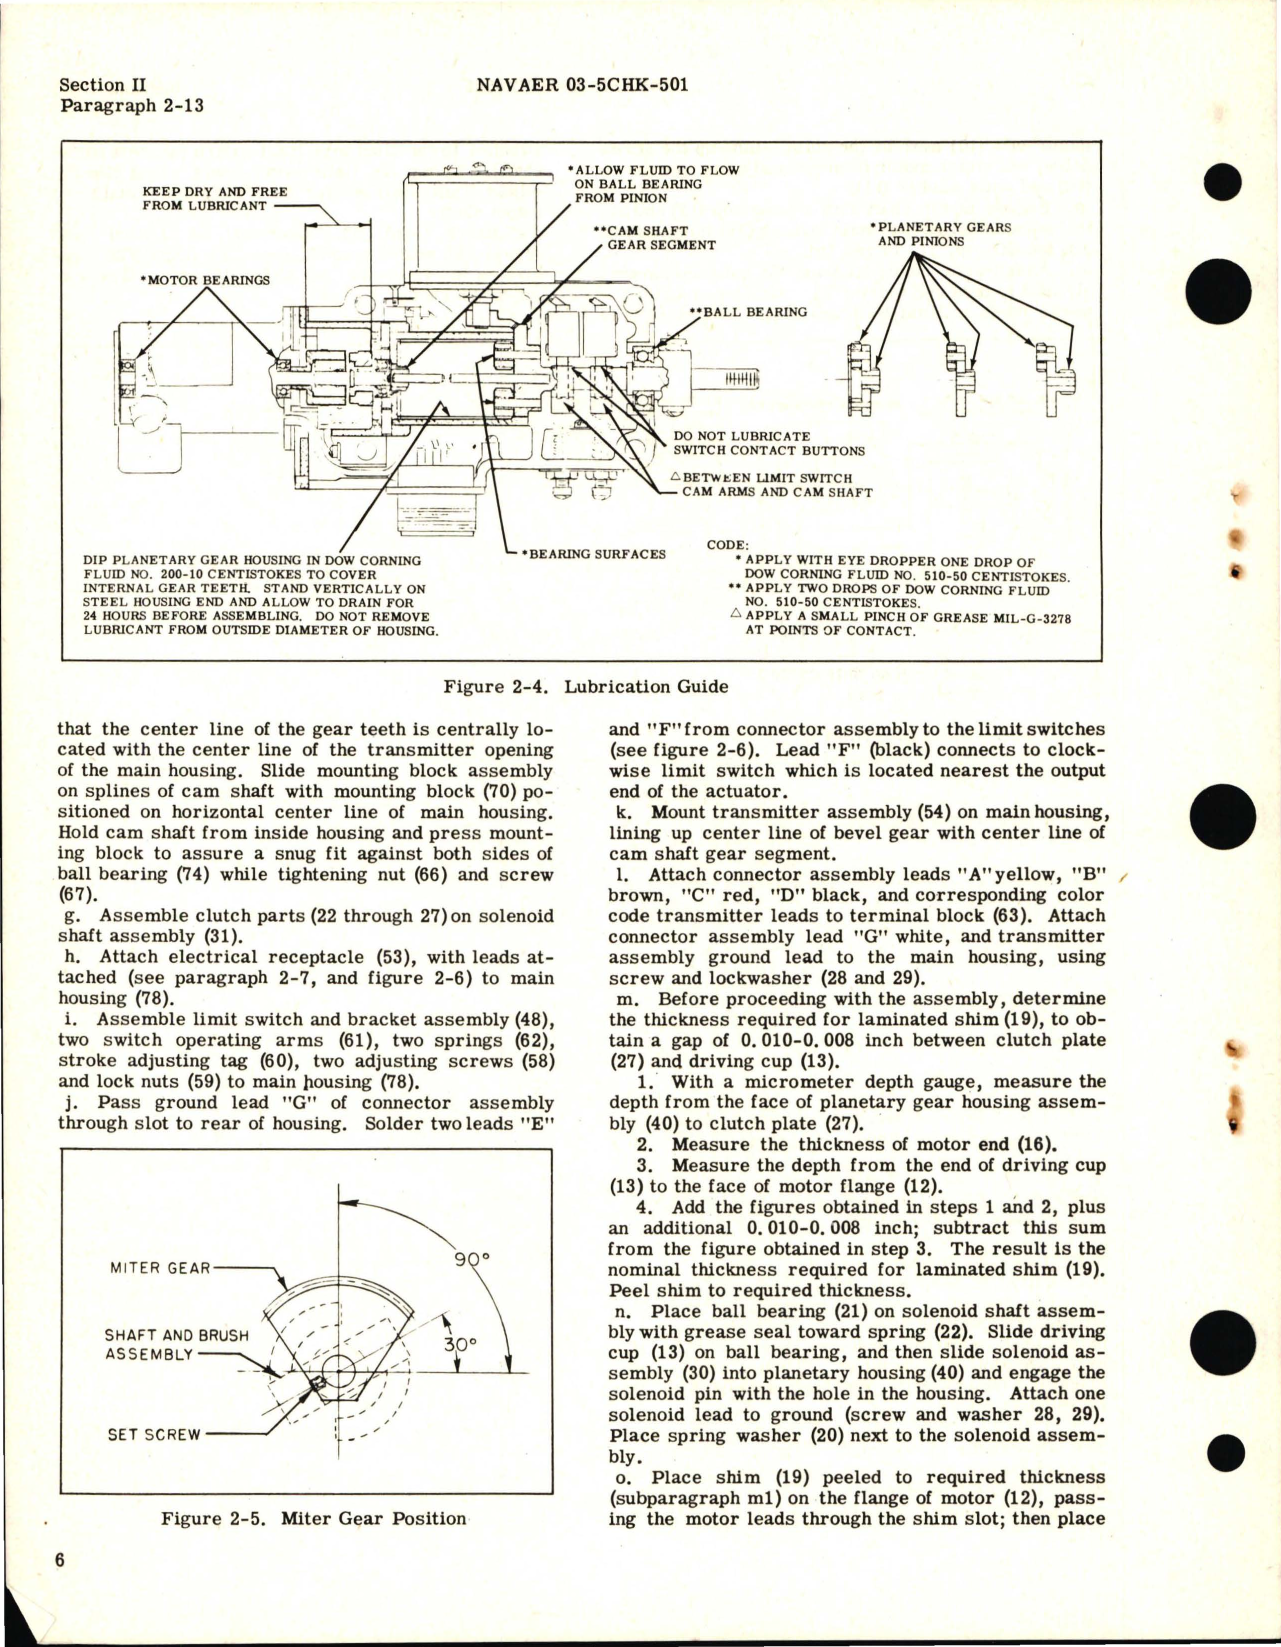 Sample page 8 from AirCorps Library document: Overhaul Instructions for Actuator Assembly, Aileron Artificial Feel Trim Part Numbers AL-1910 and AL-1423-1